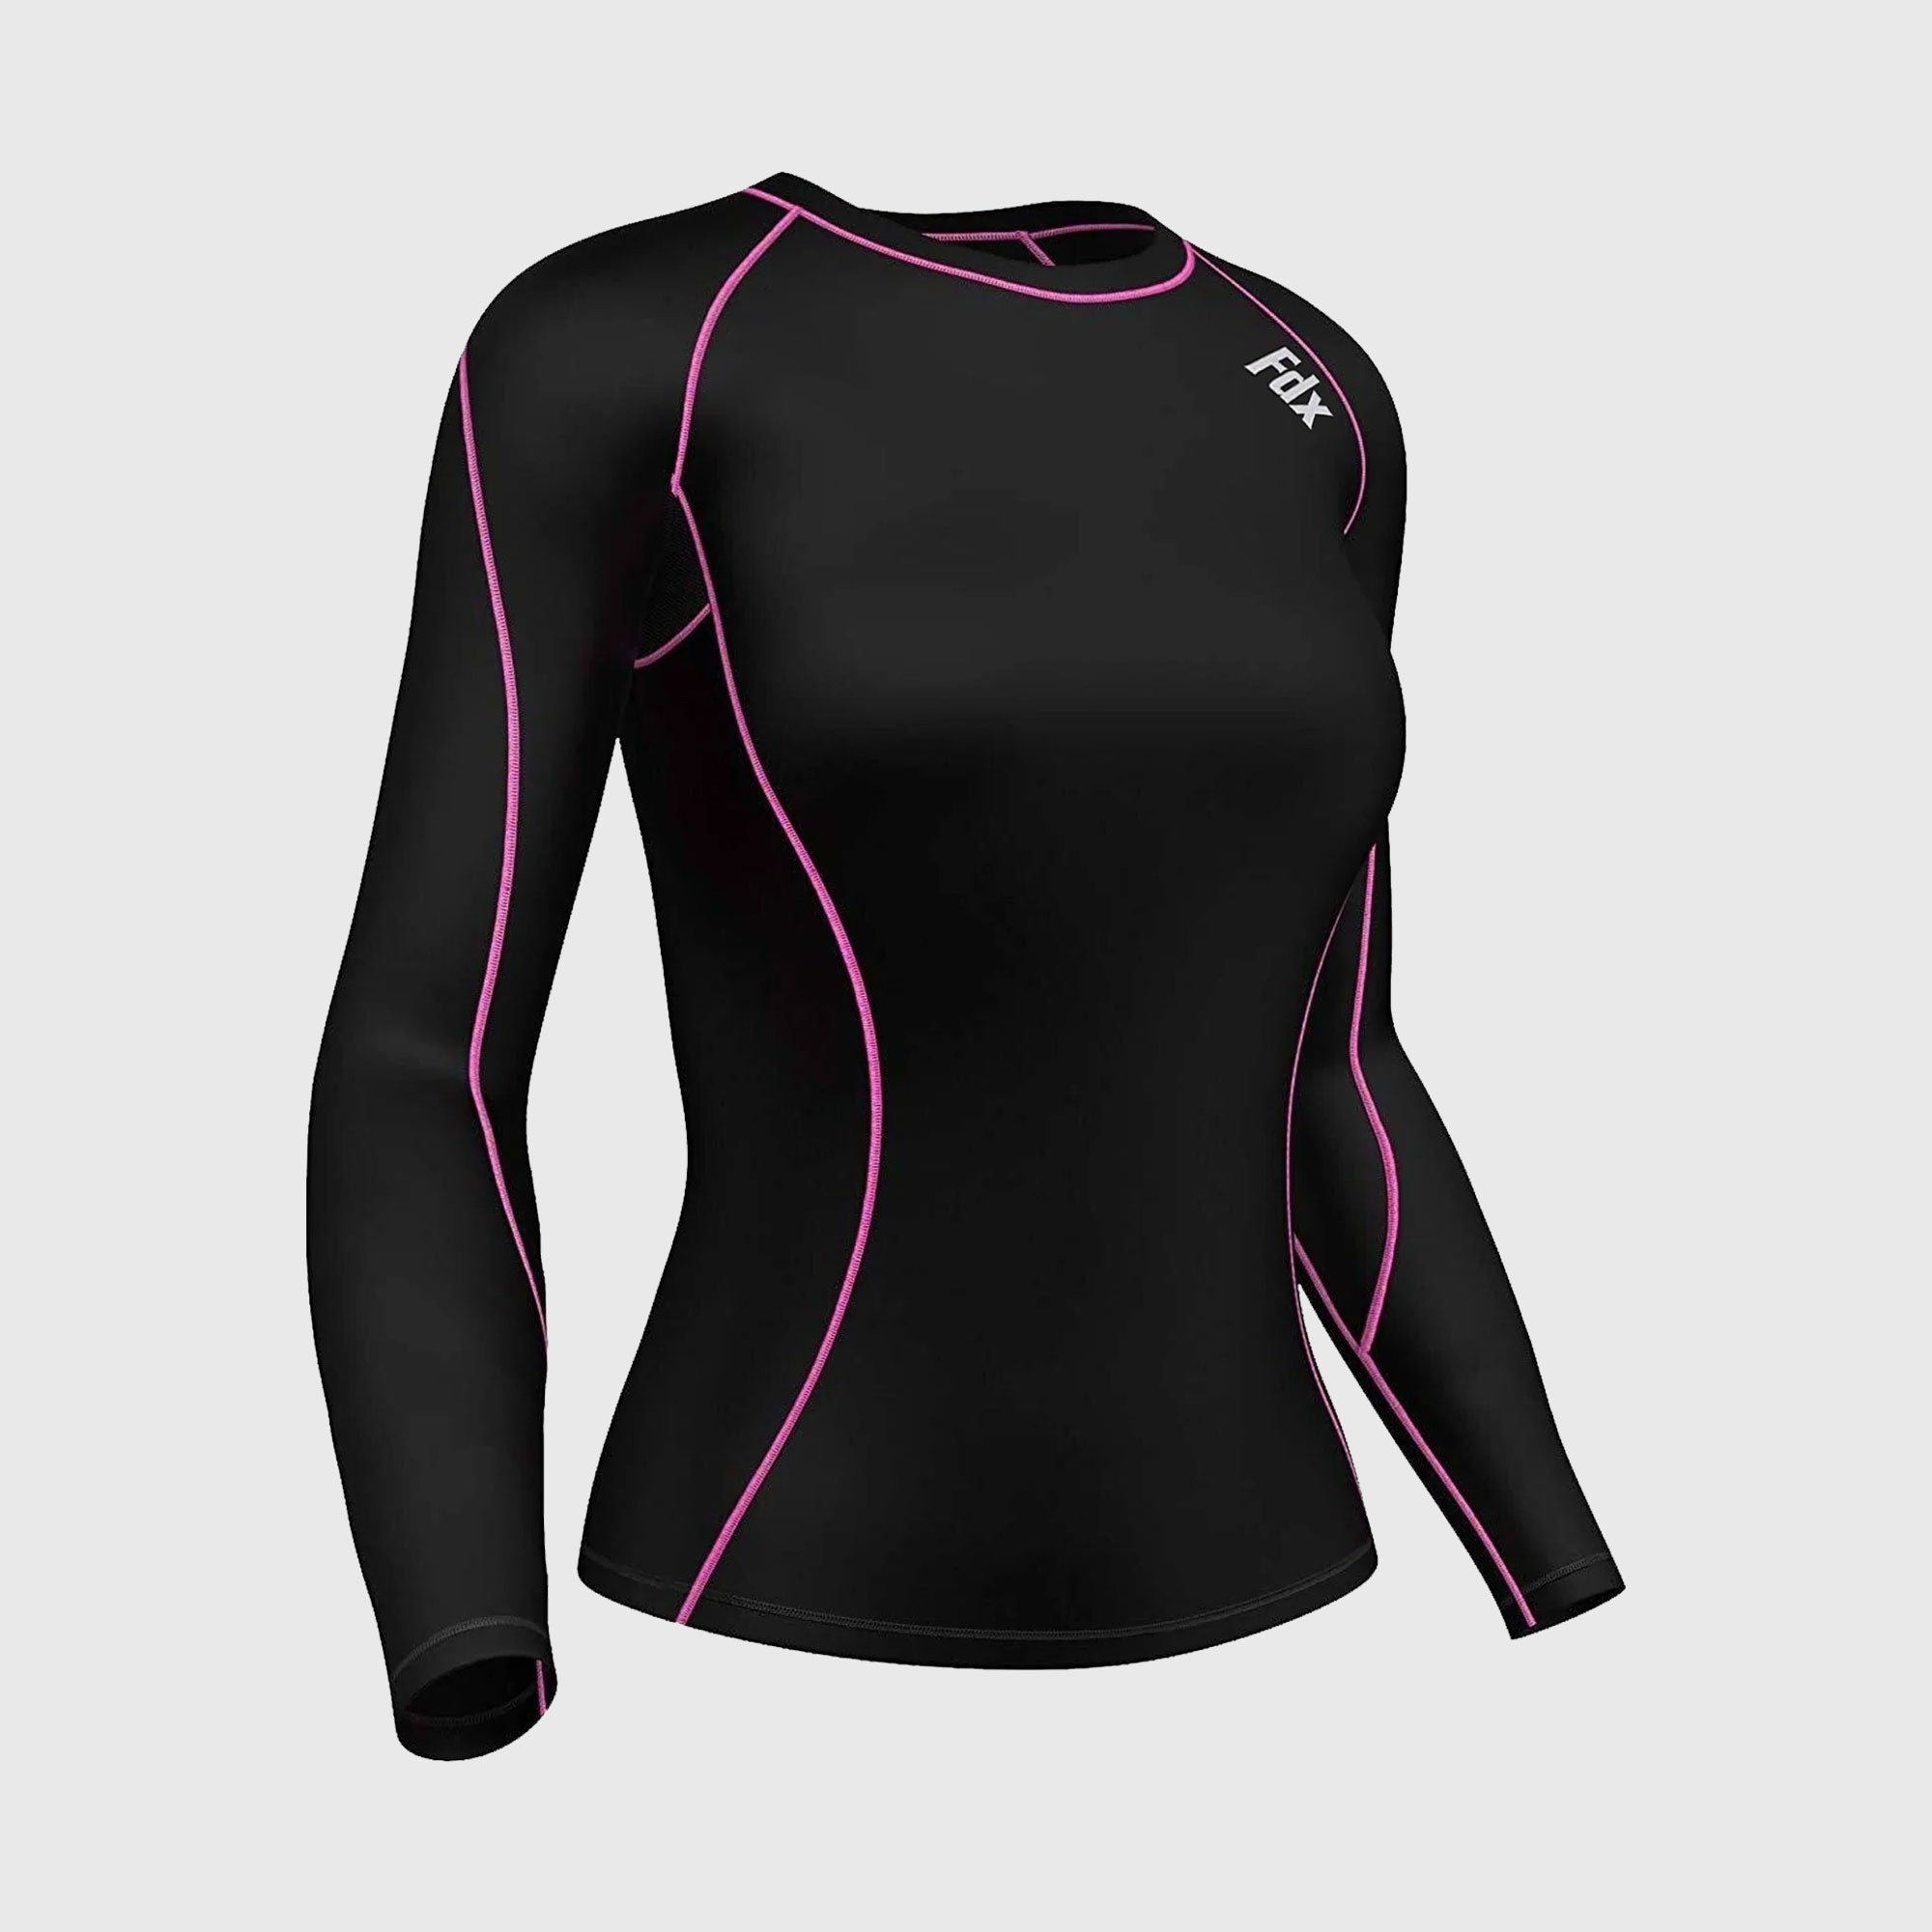 Fdx Monarch Pink Women's Base Layer Long Sleeve Compression Top